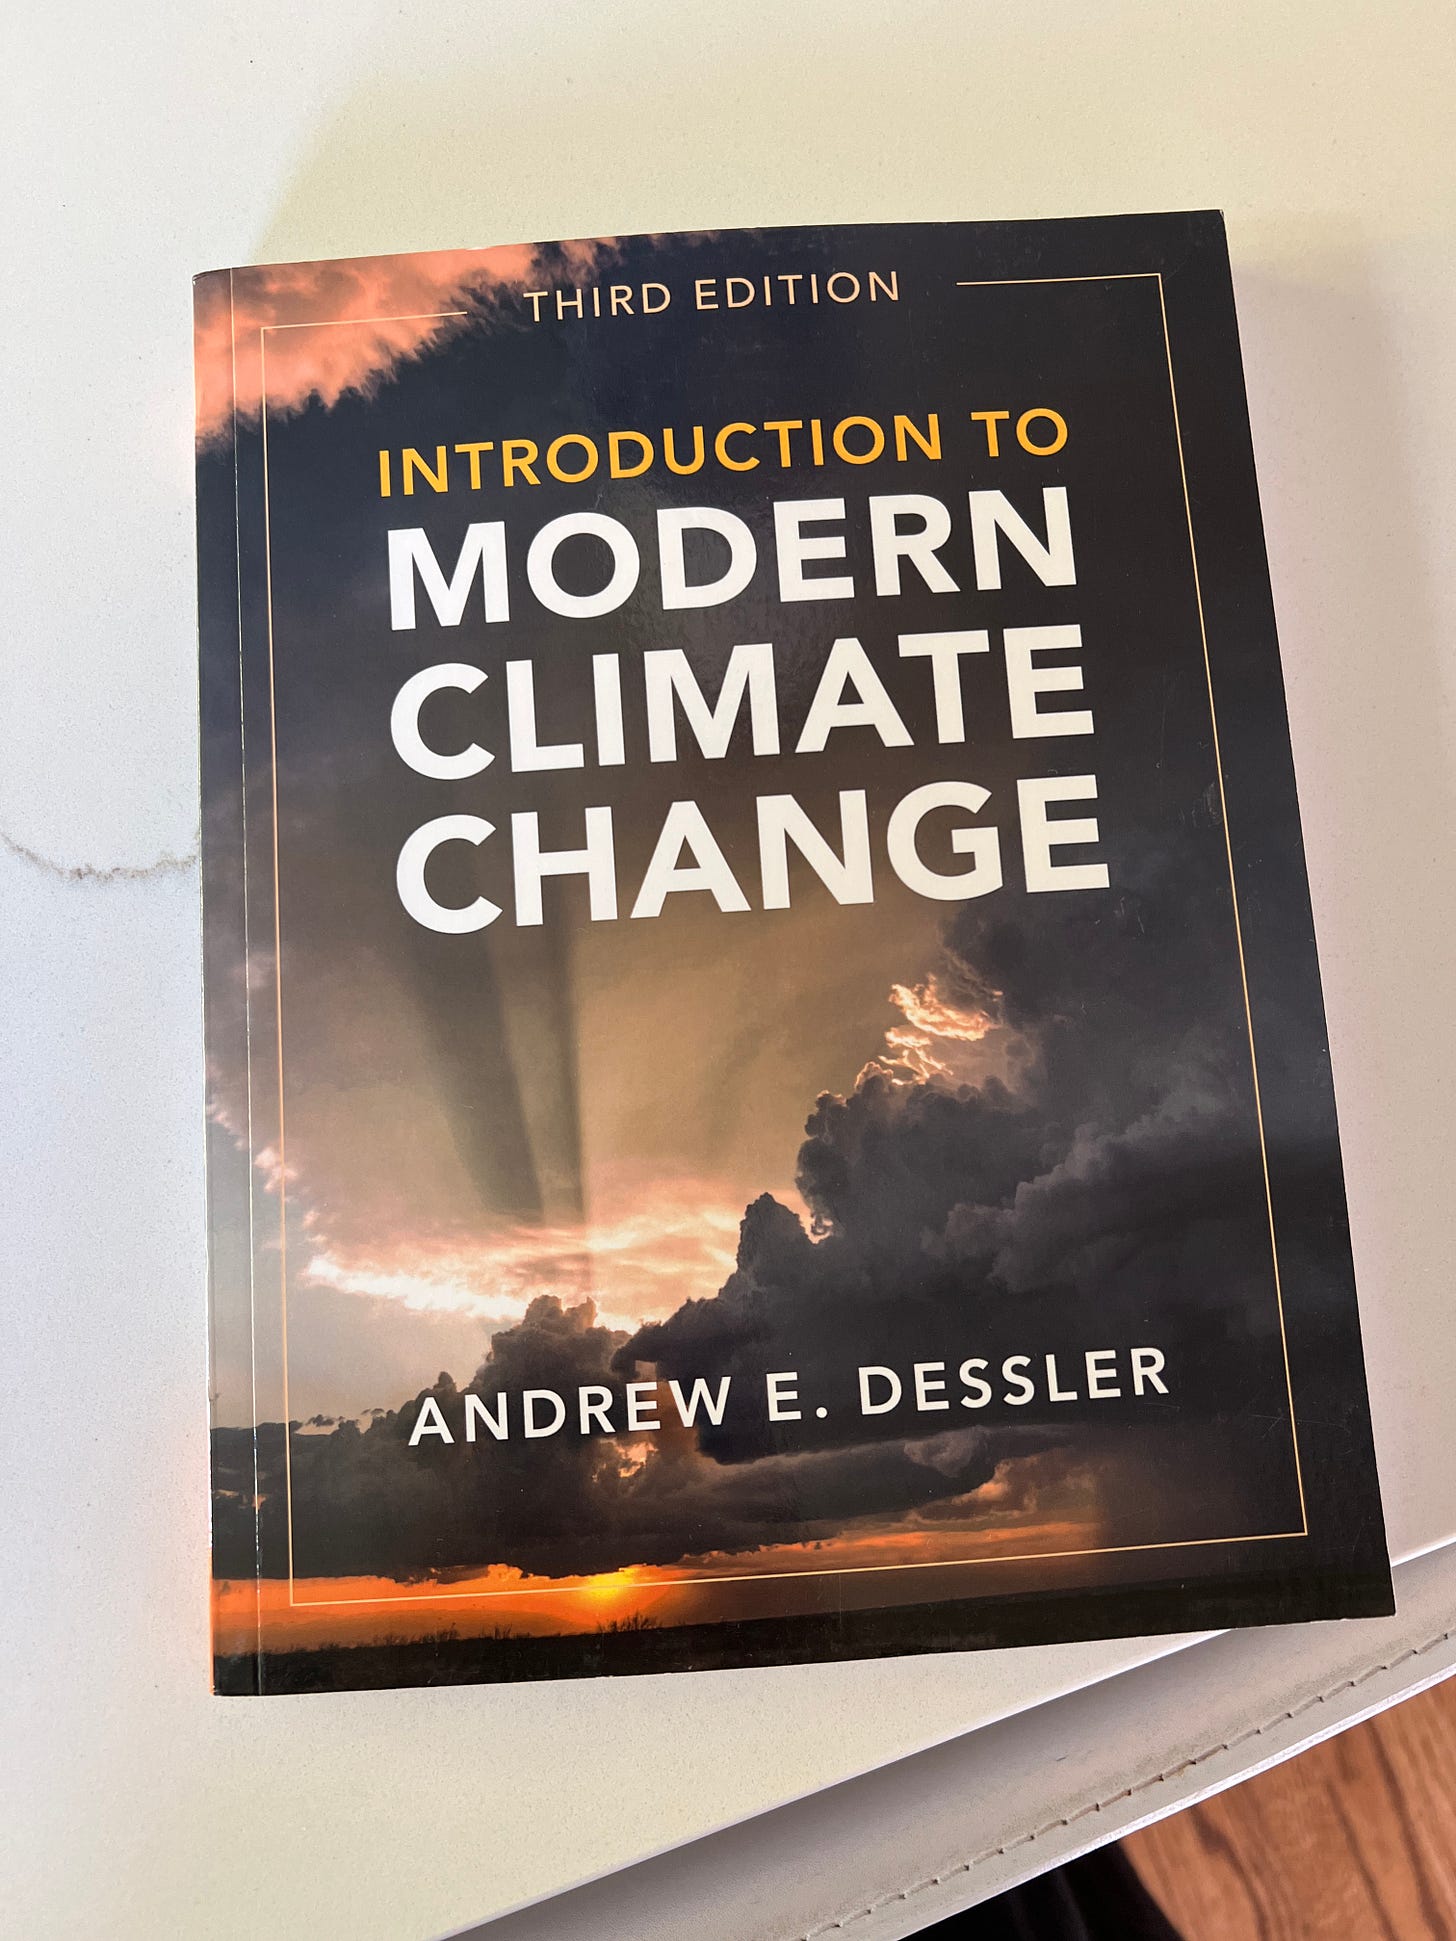 A picture of my copy of the book Introduction to Modern Climate Change by Andrew Dessler